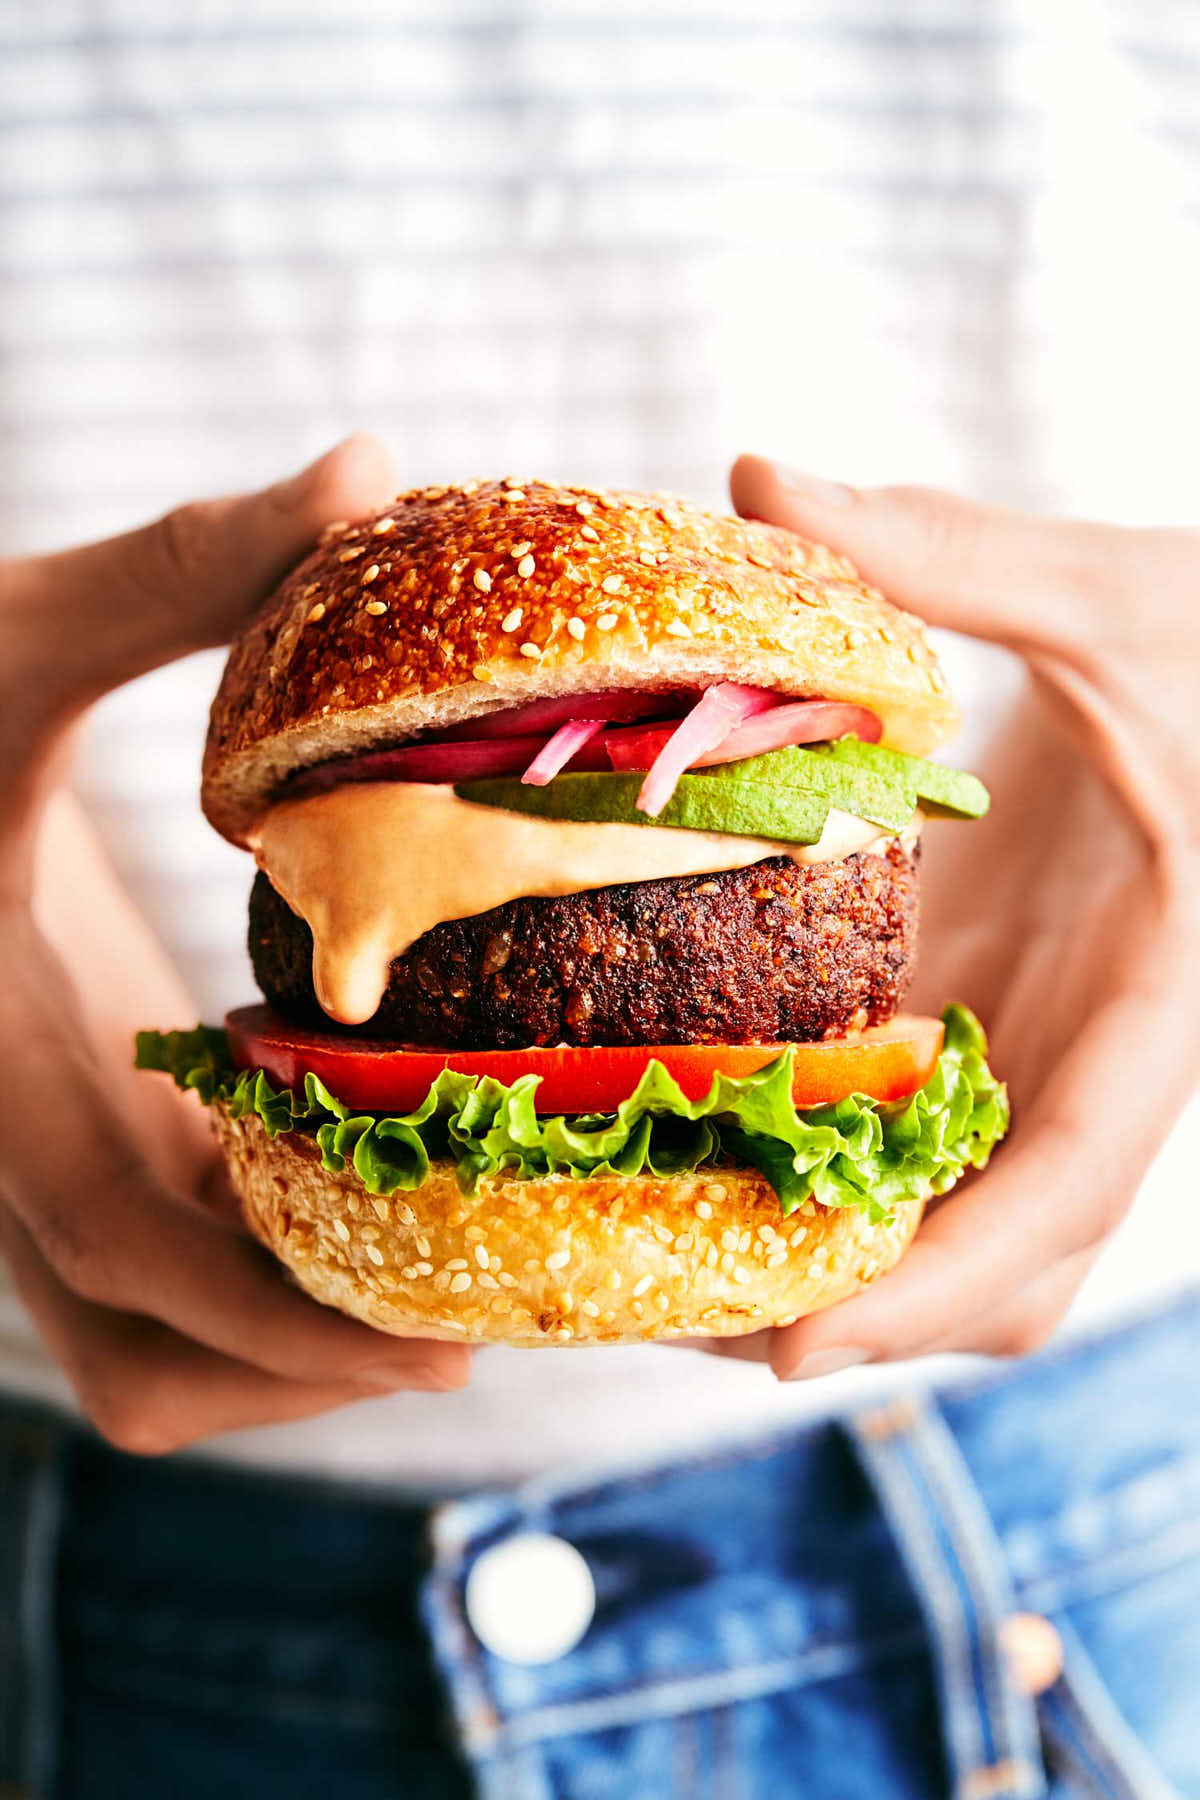 Chipotle black bean burger with avocado, pickled red onions and chipotle mayo being held in front of a white shirt and denim jeans